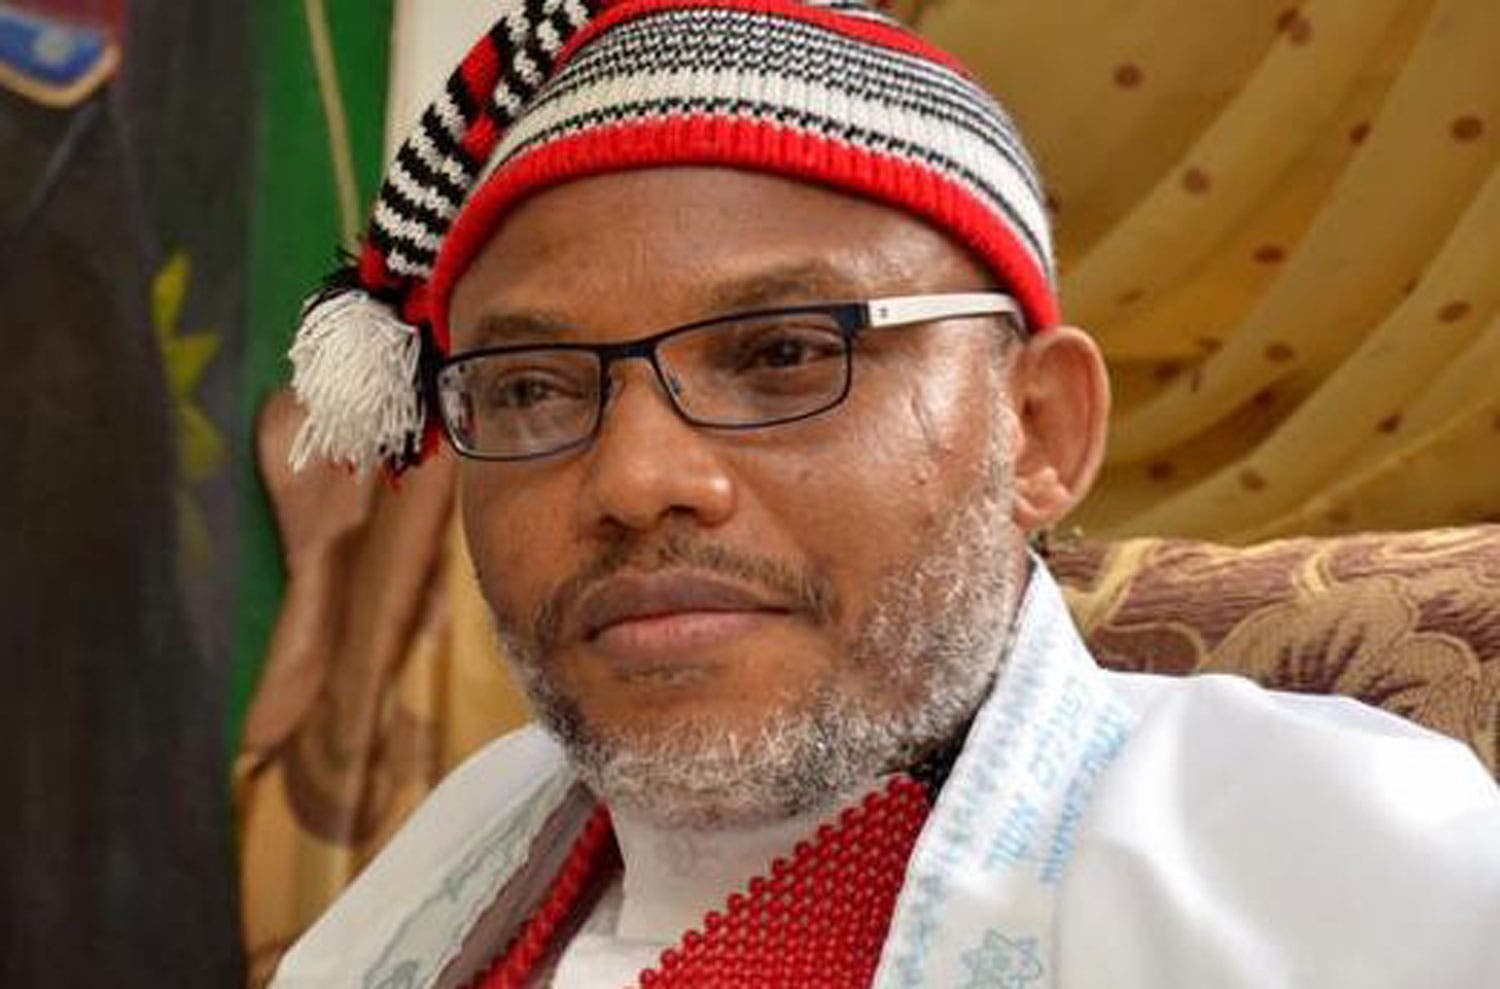 Biafra: IPOB raises alarm over DSS’s alleged restrictions on Nnamdi Kanu’s visitors